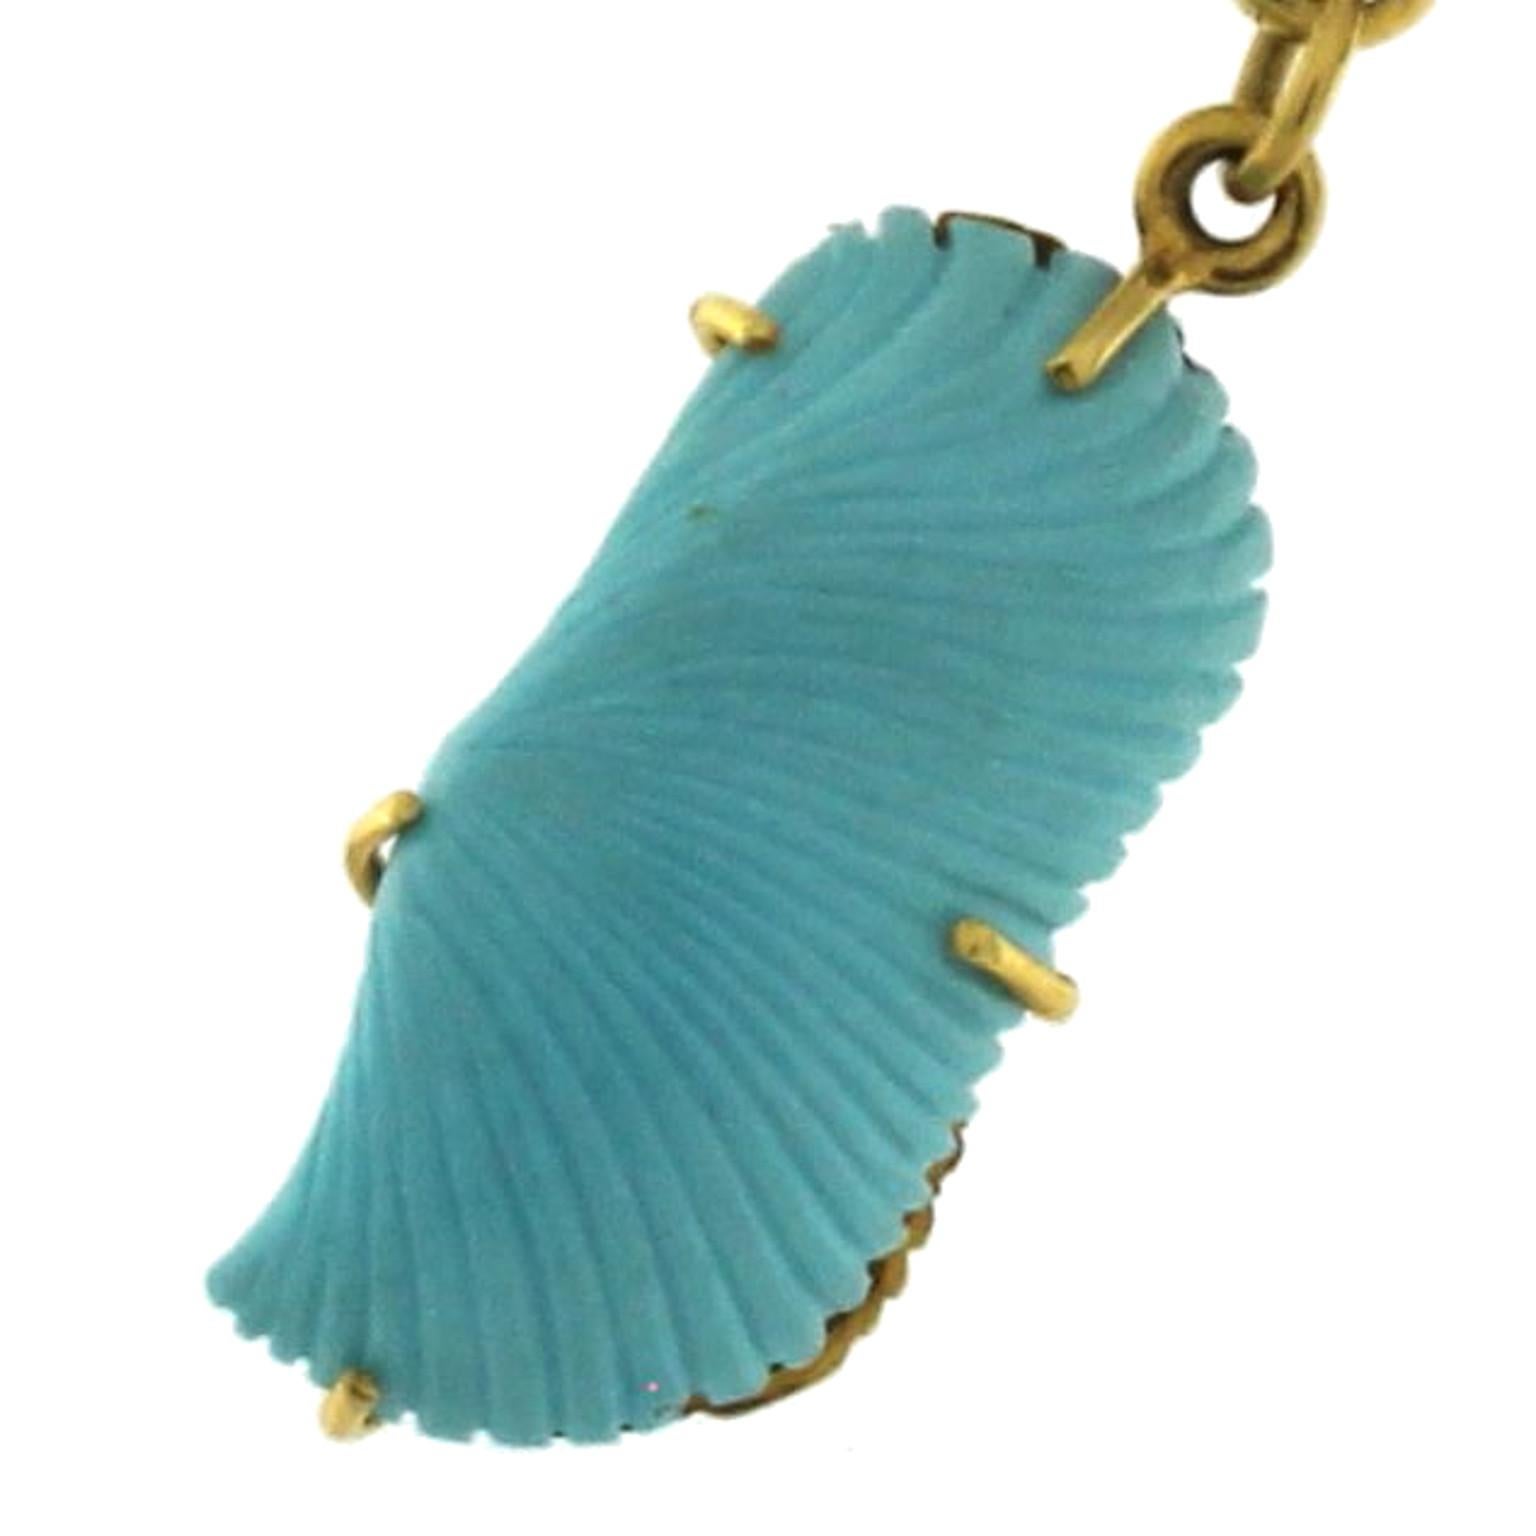 This beautiful necklace from the Beachwear collection reproduces some marine elements alternately in turquoise and gold, for both materials the sculptor has done an excellent work of realistic reproduction very faithful. The result is wonderful
The